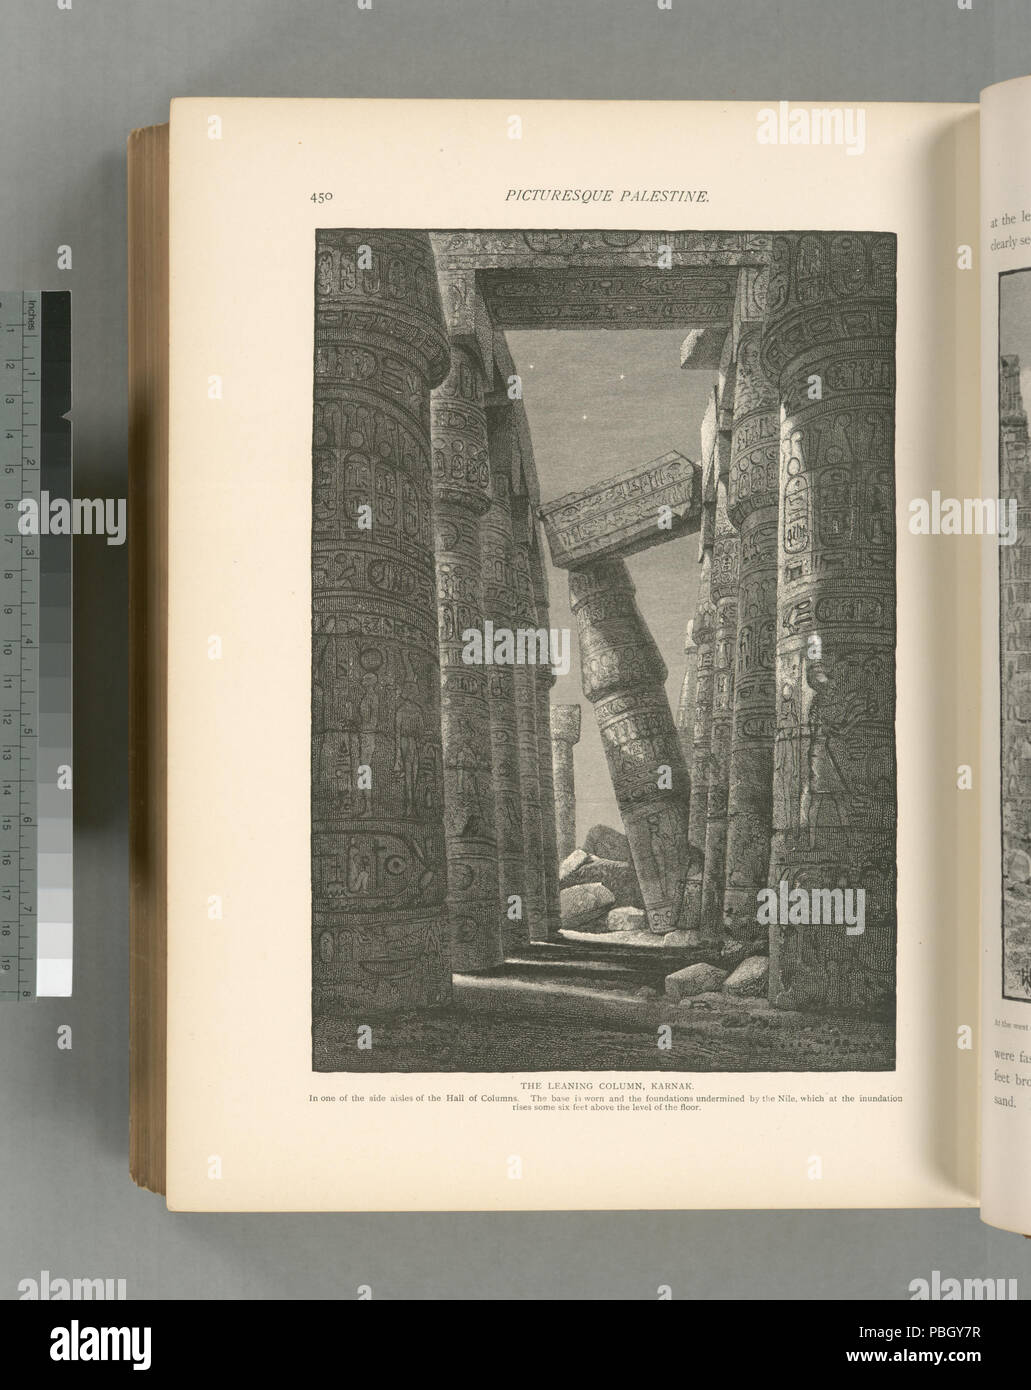 1651 The leaning column, Karnak. In one side of the aisles of the Hall of Columns. The base is worn and the foundations undermined by the Nile, which at the inundation rises some six feet above (NYPL b10607452-80850) Stock Photo